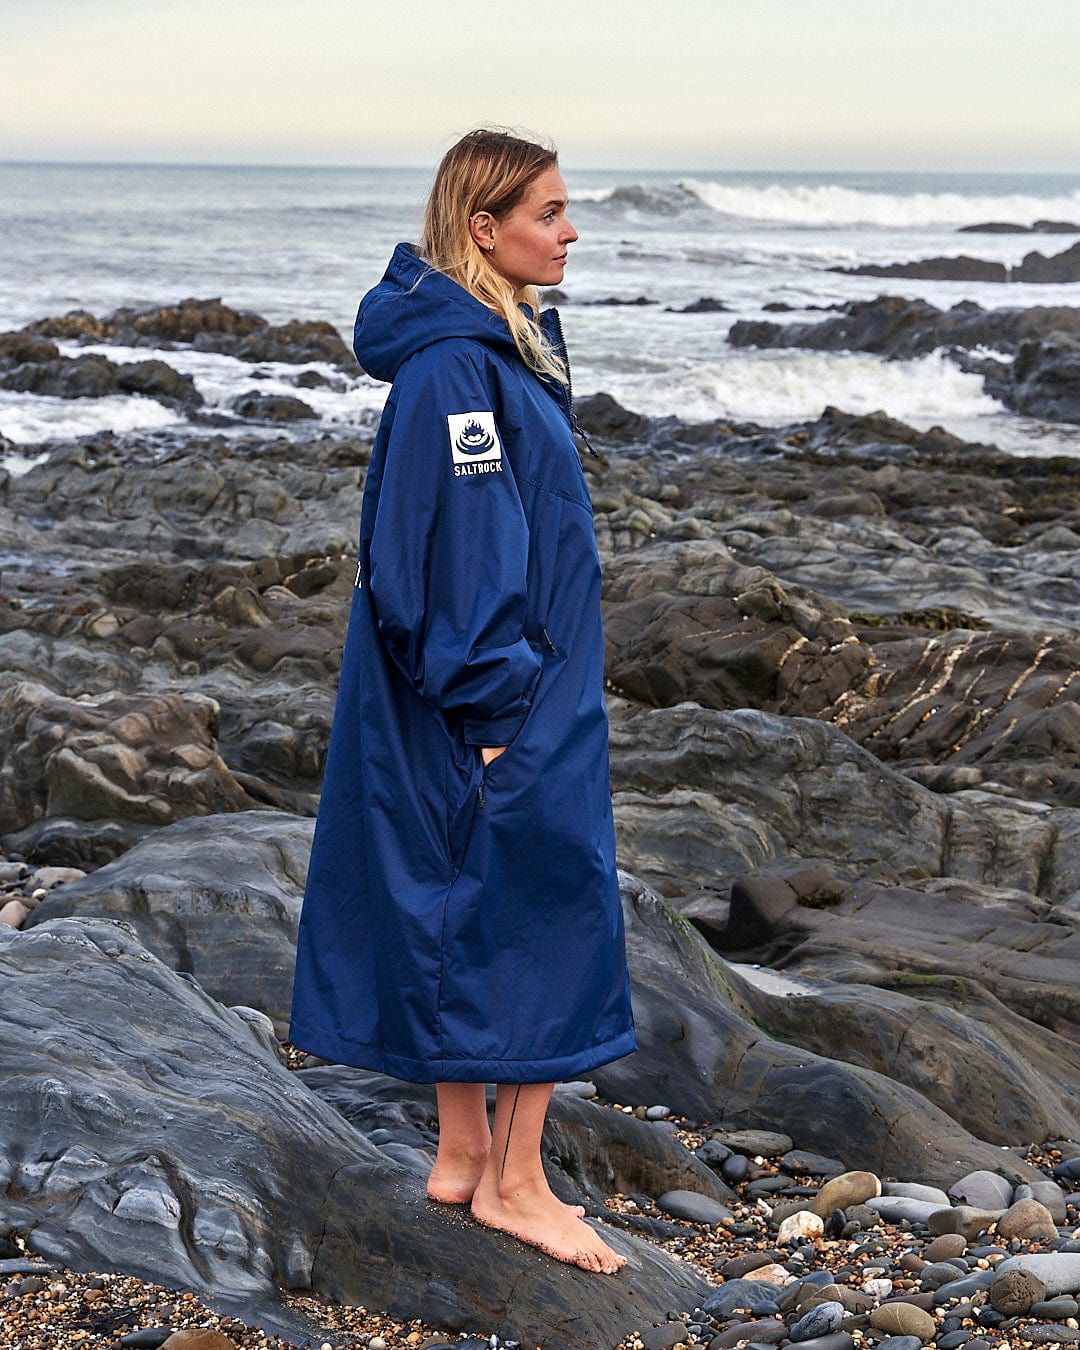 Woman in Saltrock's Recycled Four Seasons Changing Robe - Blue standing on rocky shore gazing at the sea.